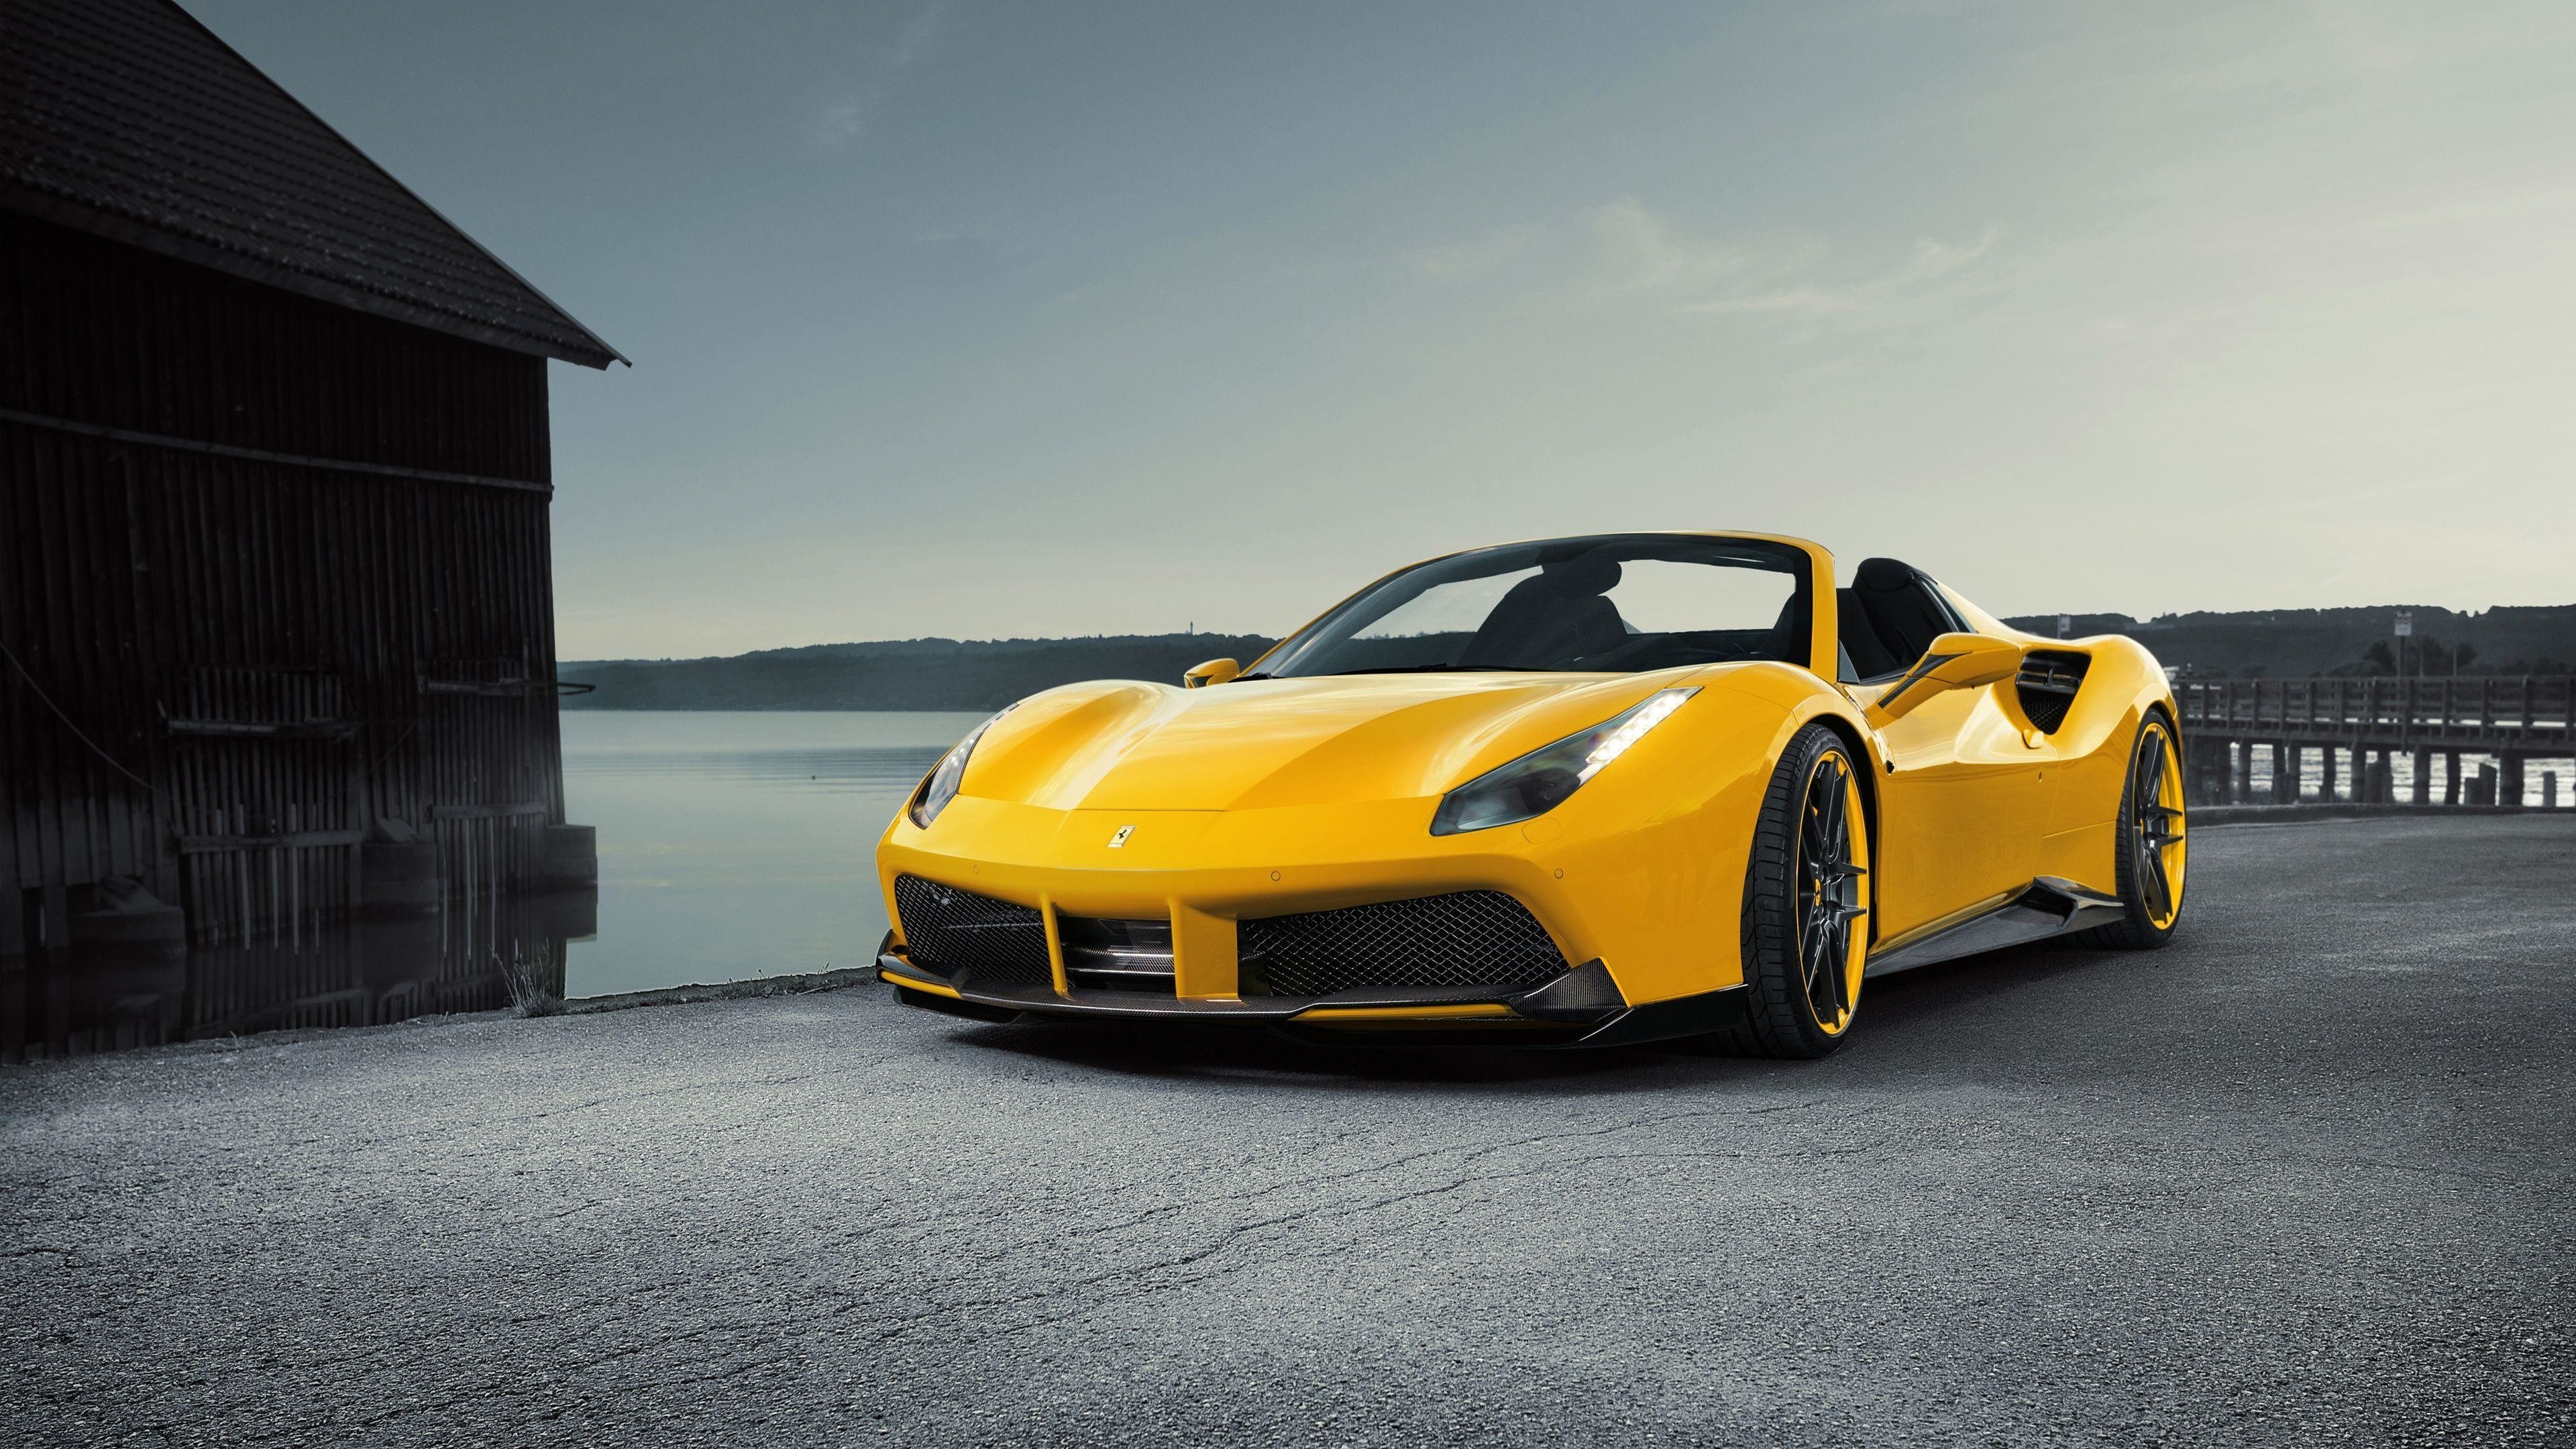 3840x2160 Ferrari Wallpapers - Page 1 - HD Wallpapers